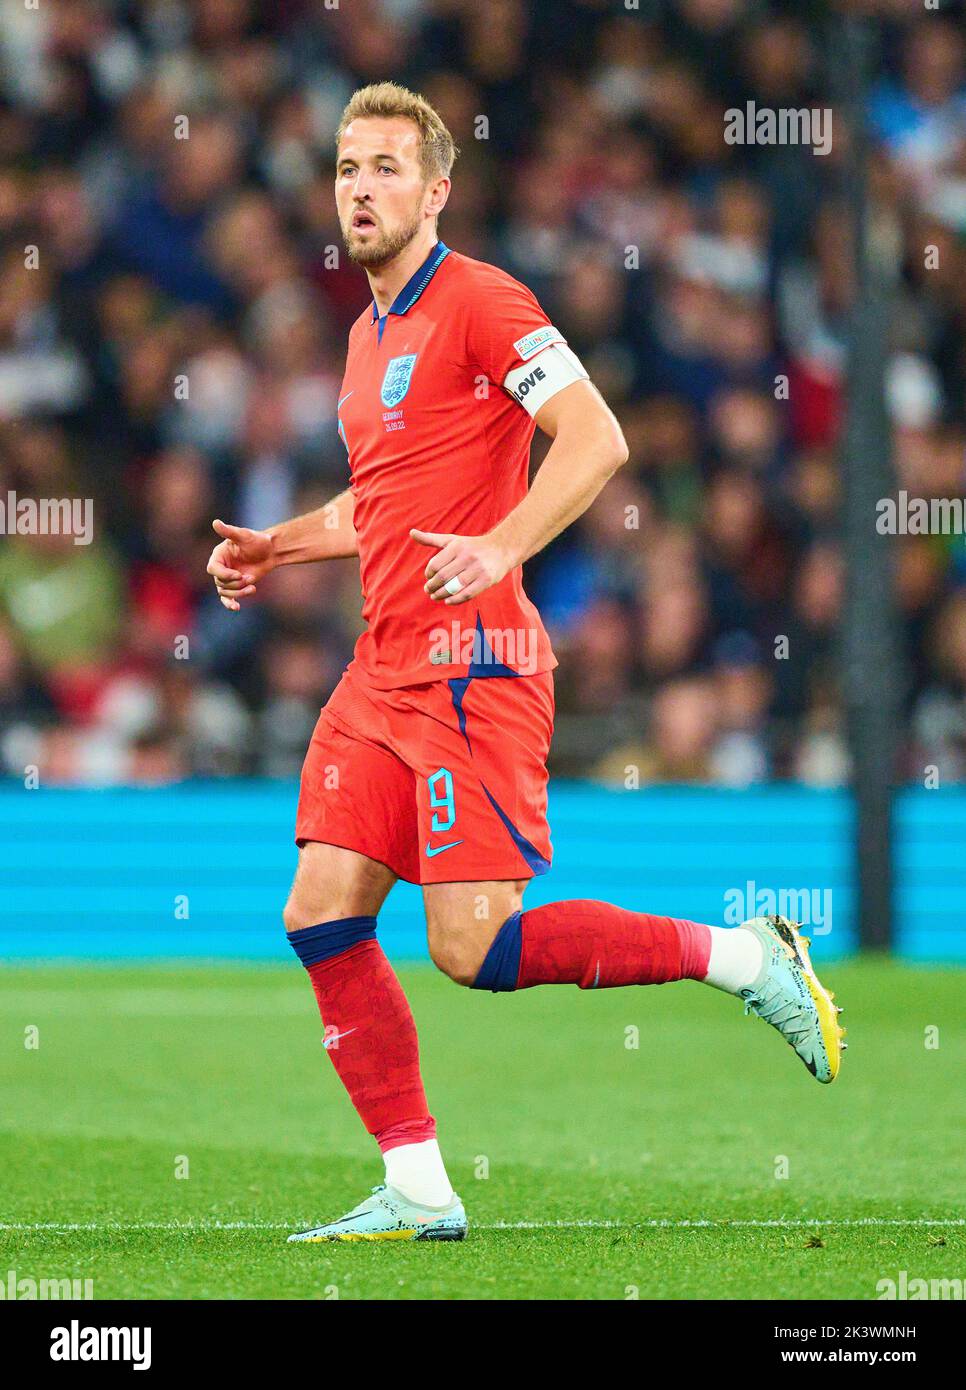 Harry KANE, England 9   in the UEFA Nations League 2022 match  ENGLAND - GERMANY 3-3  in Season 2022/2023 on Sept 26, 2022  in London, Great Britain.  © Peter Schatz / Alamy Live News Stock Photo